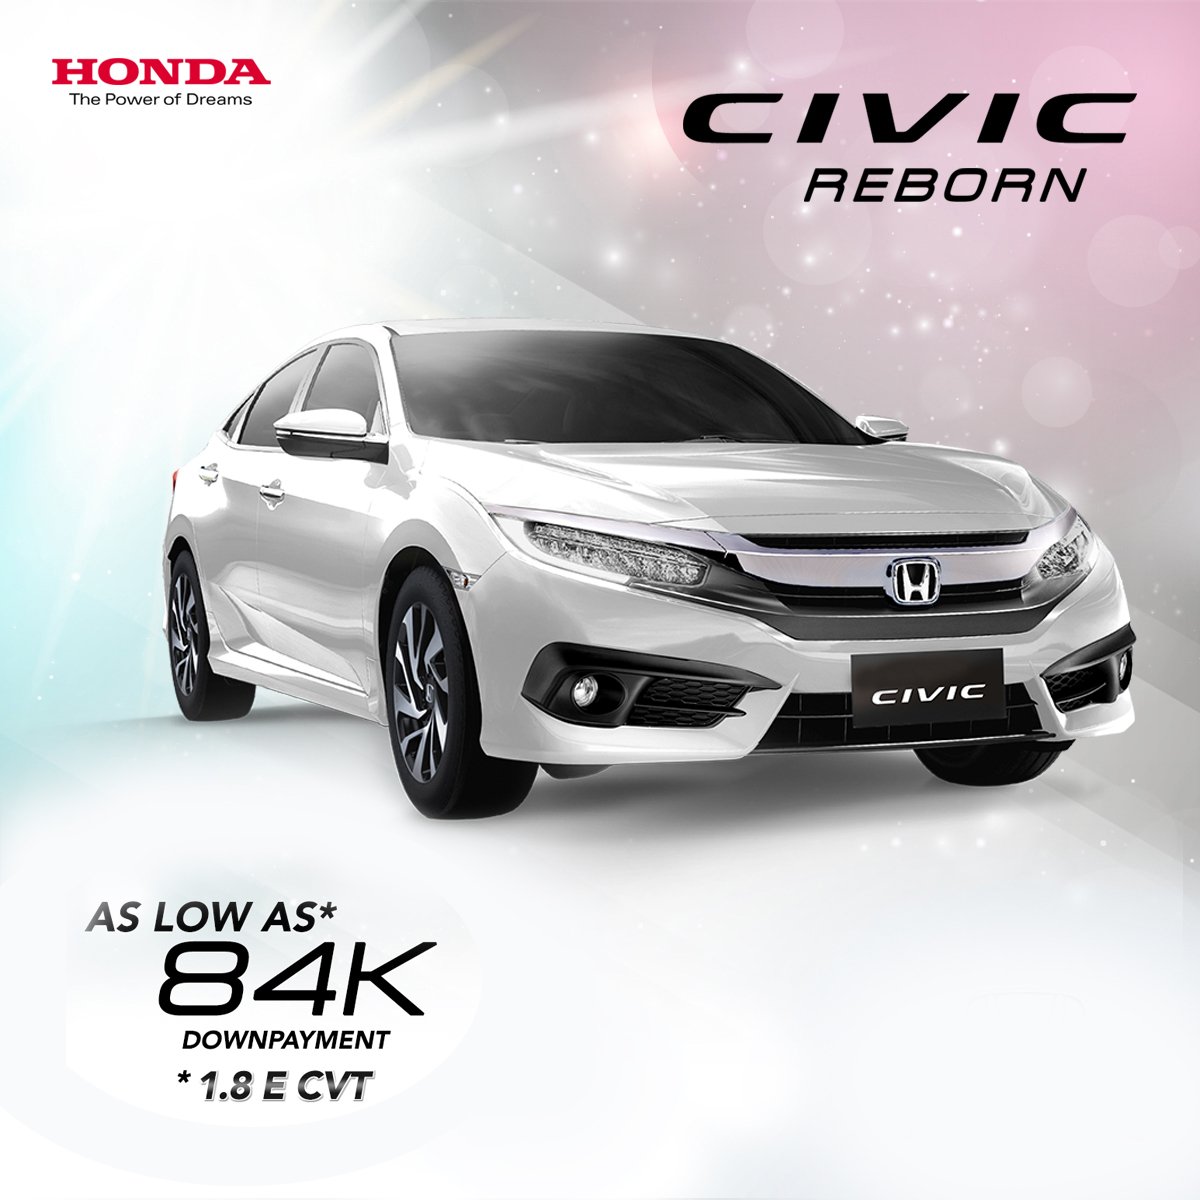 Honda Cars Philippines Make Your Dream A Reality Get The Honda Civic 1 8 E For As Low As 84k Downpayment For Details Visit T Co 21mcgk4ttv T Co Ibpax2lh3v